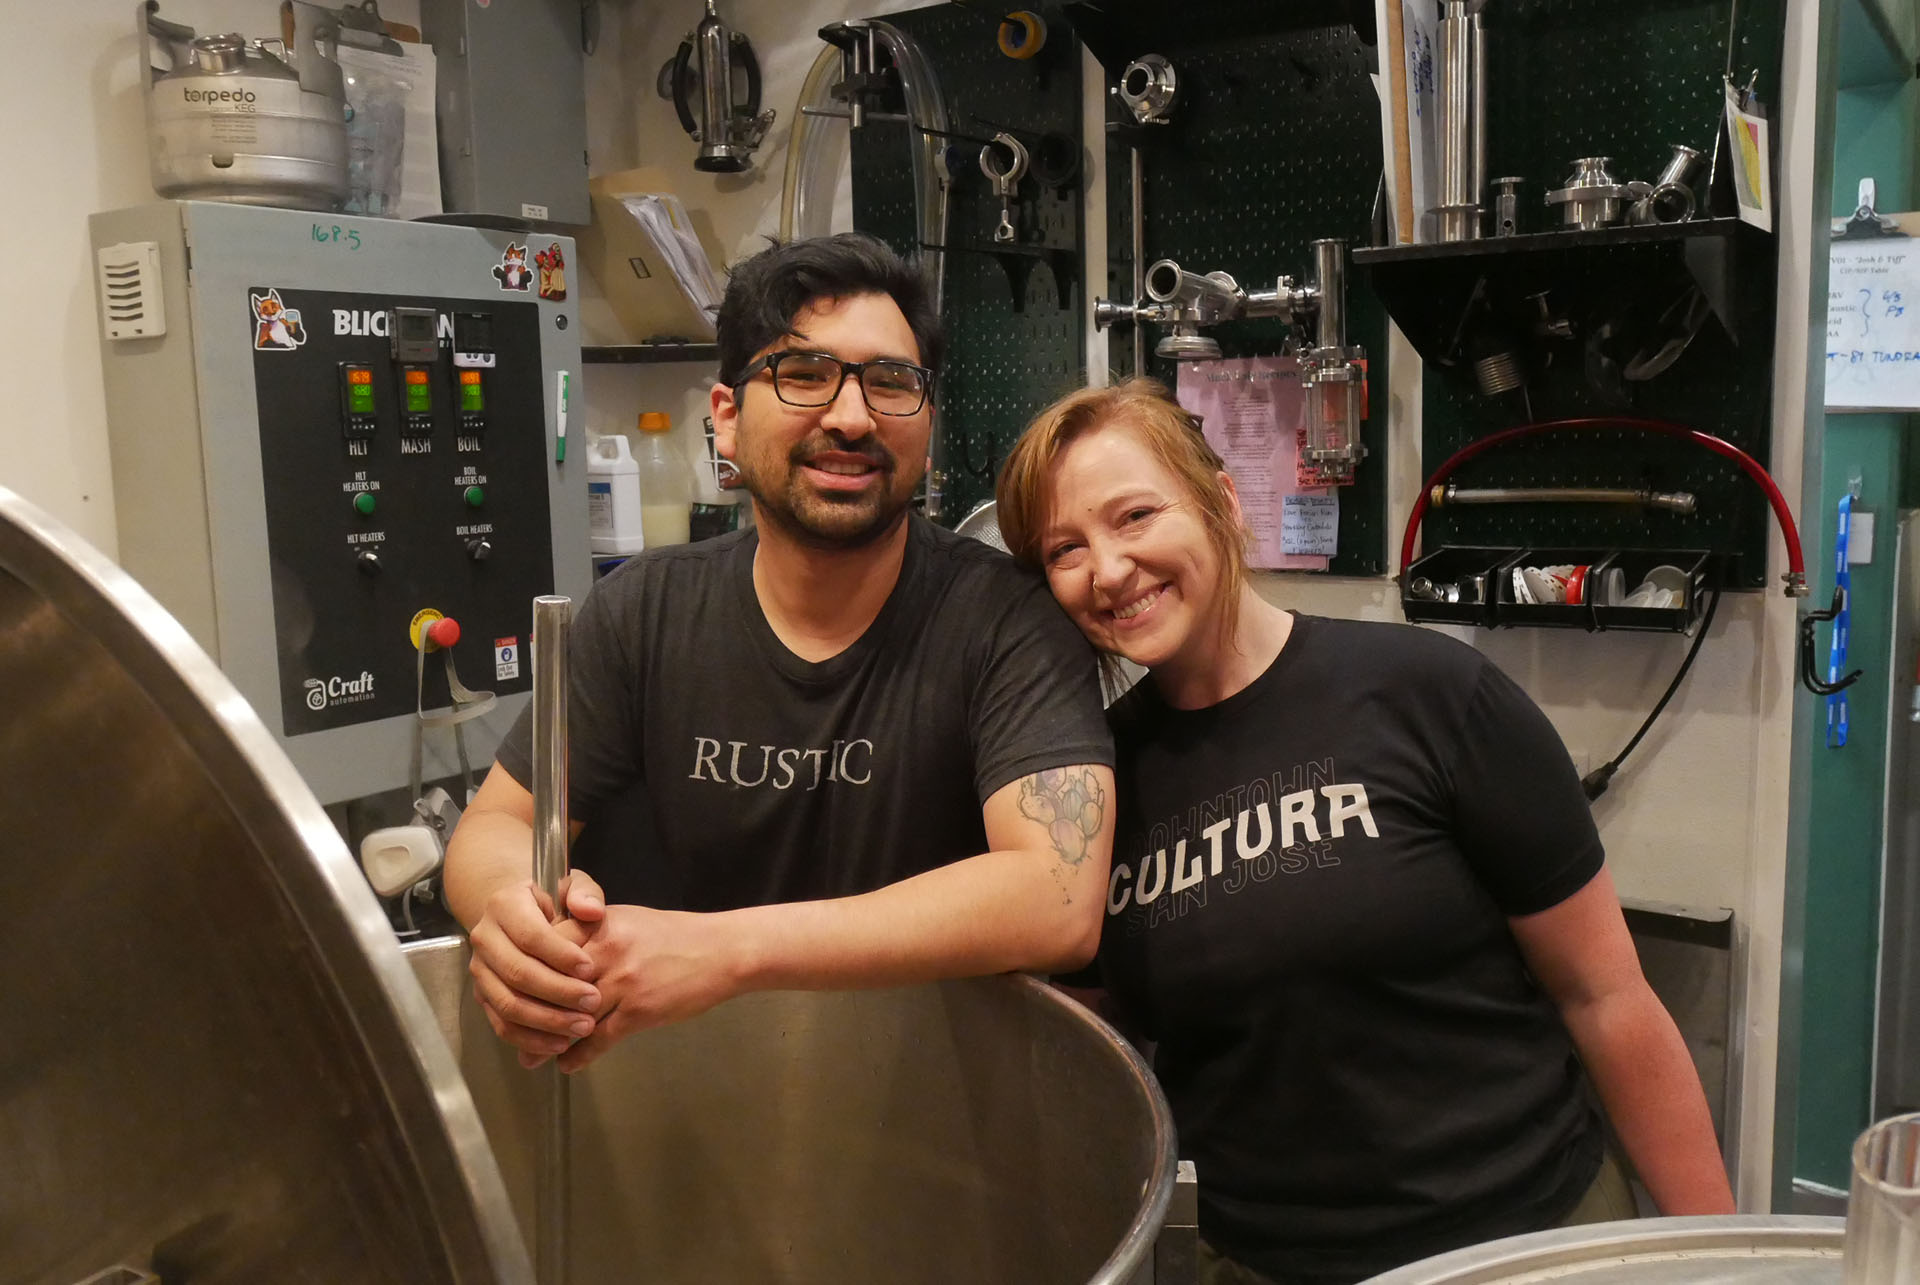 A man and woman in black T-shirts pose for a photo in front of a large kettle for brewing beer.